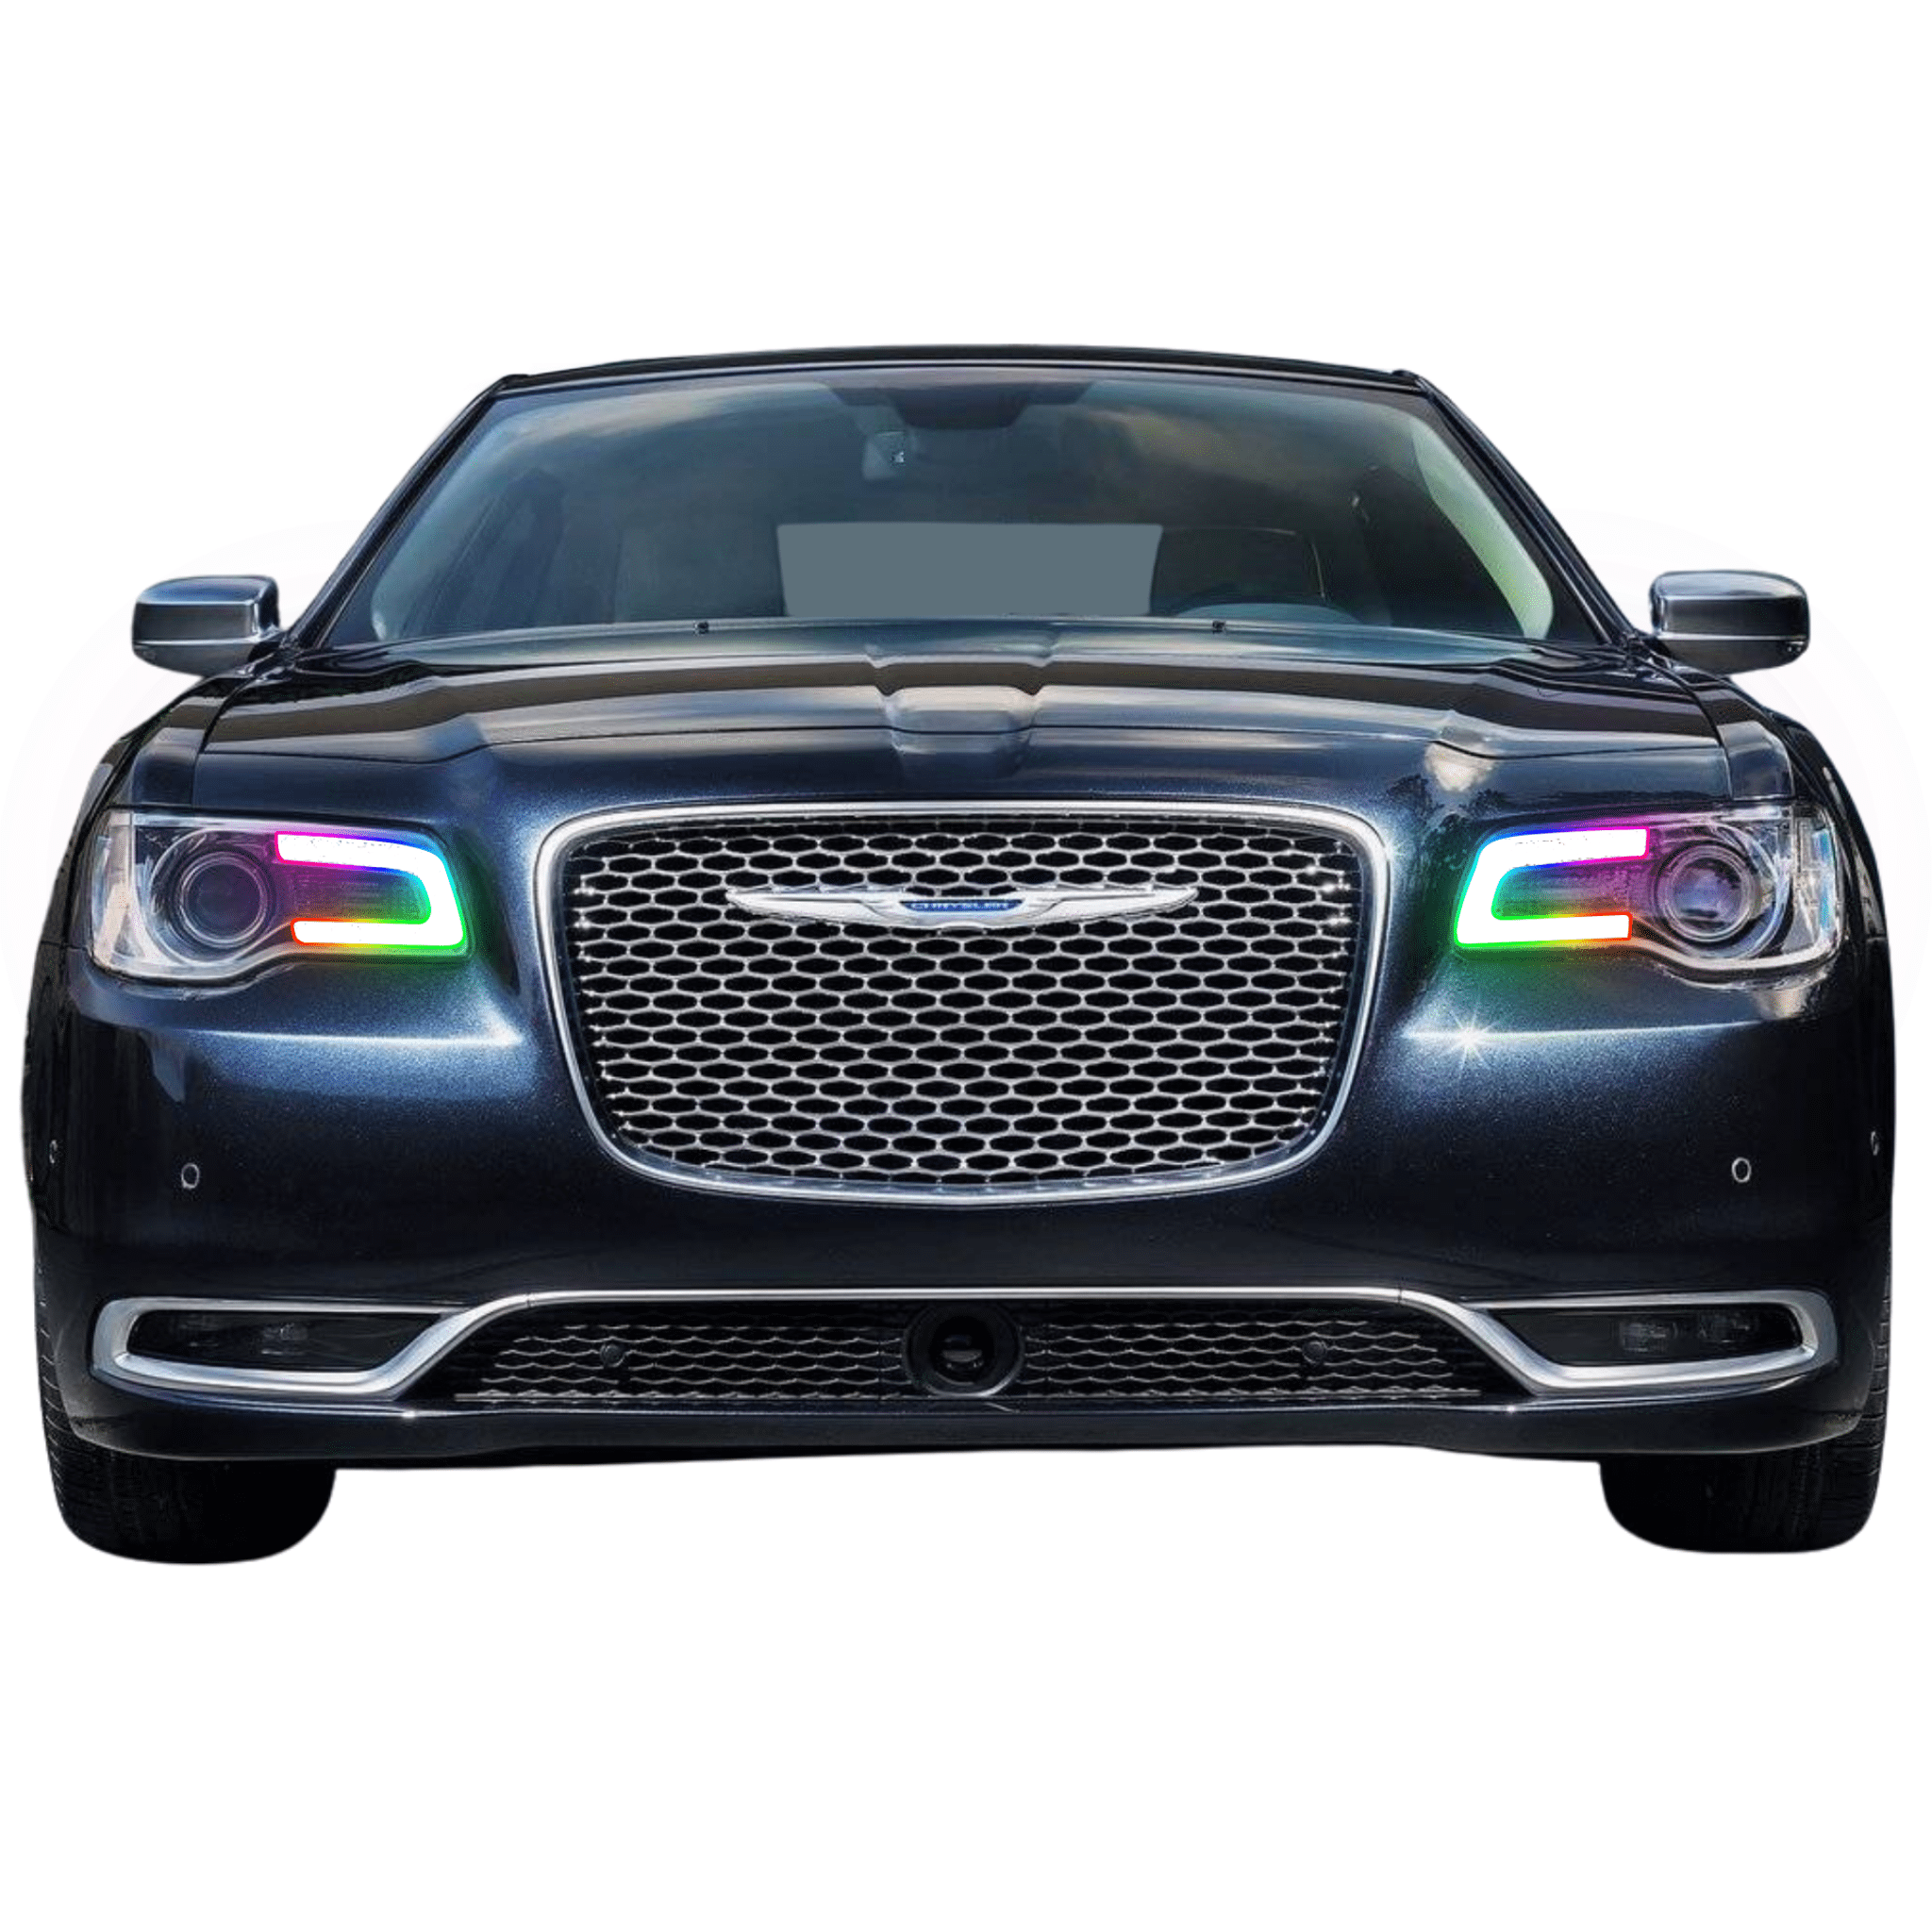 2011-2021 Chrysler 300 Multicolor DRL Boards - RGB Halo Kits Multicolor Flow Series Color Chasing RGBWA LED headlight kit Colorshift Oracle Lighting Trendz OneUpLighting Morimoto theretrofitsource AutoLEDTech Diode Dynamics